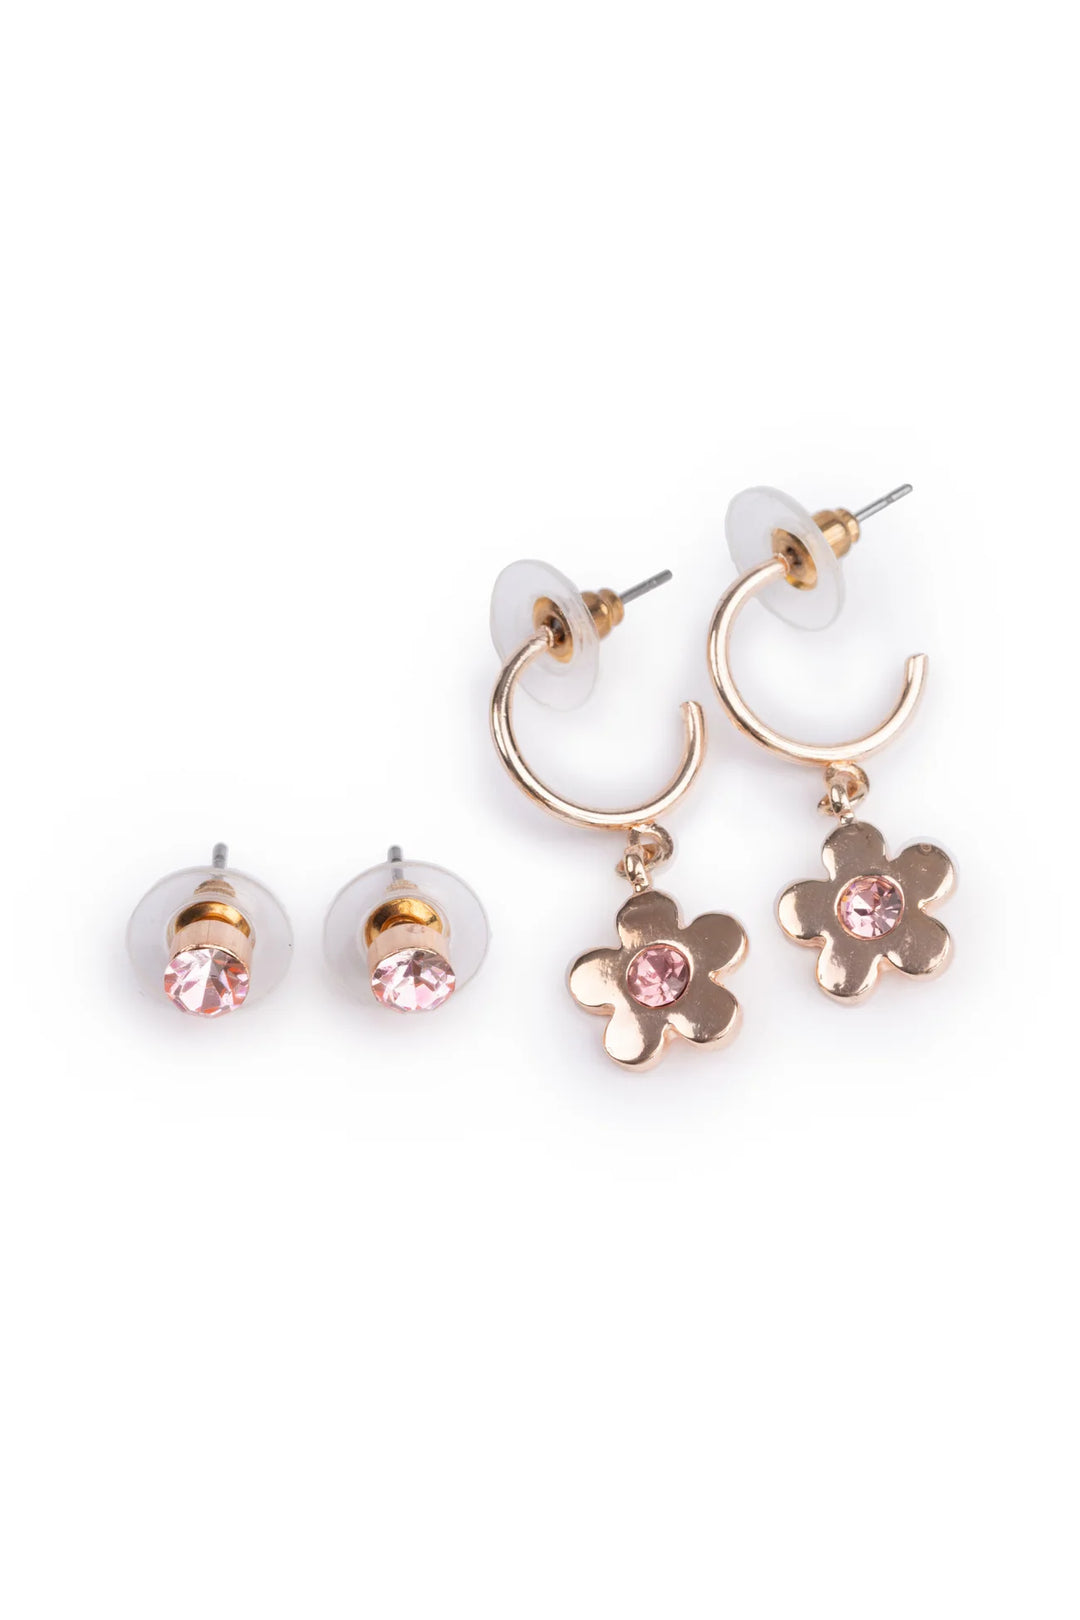 Boutique Chic Bejewelled Blooms Earring Set